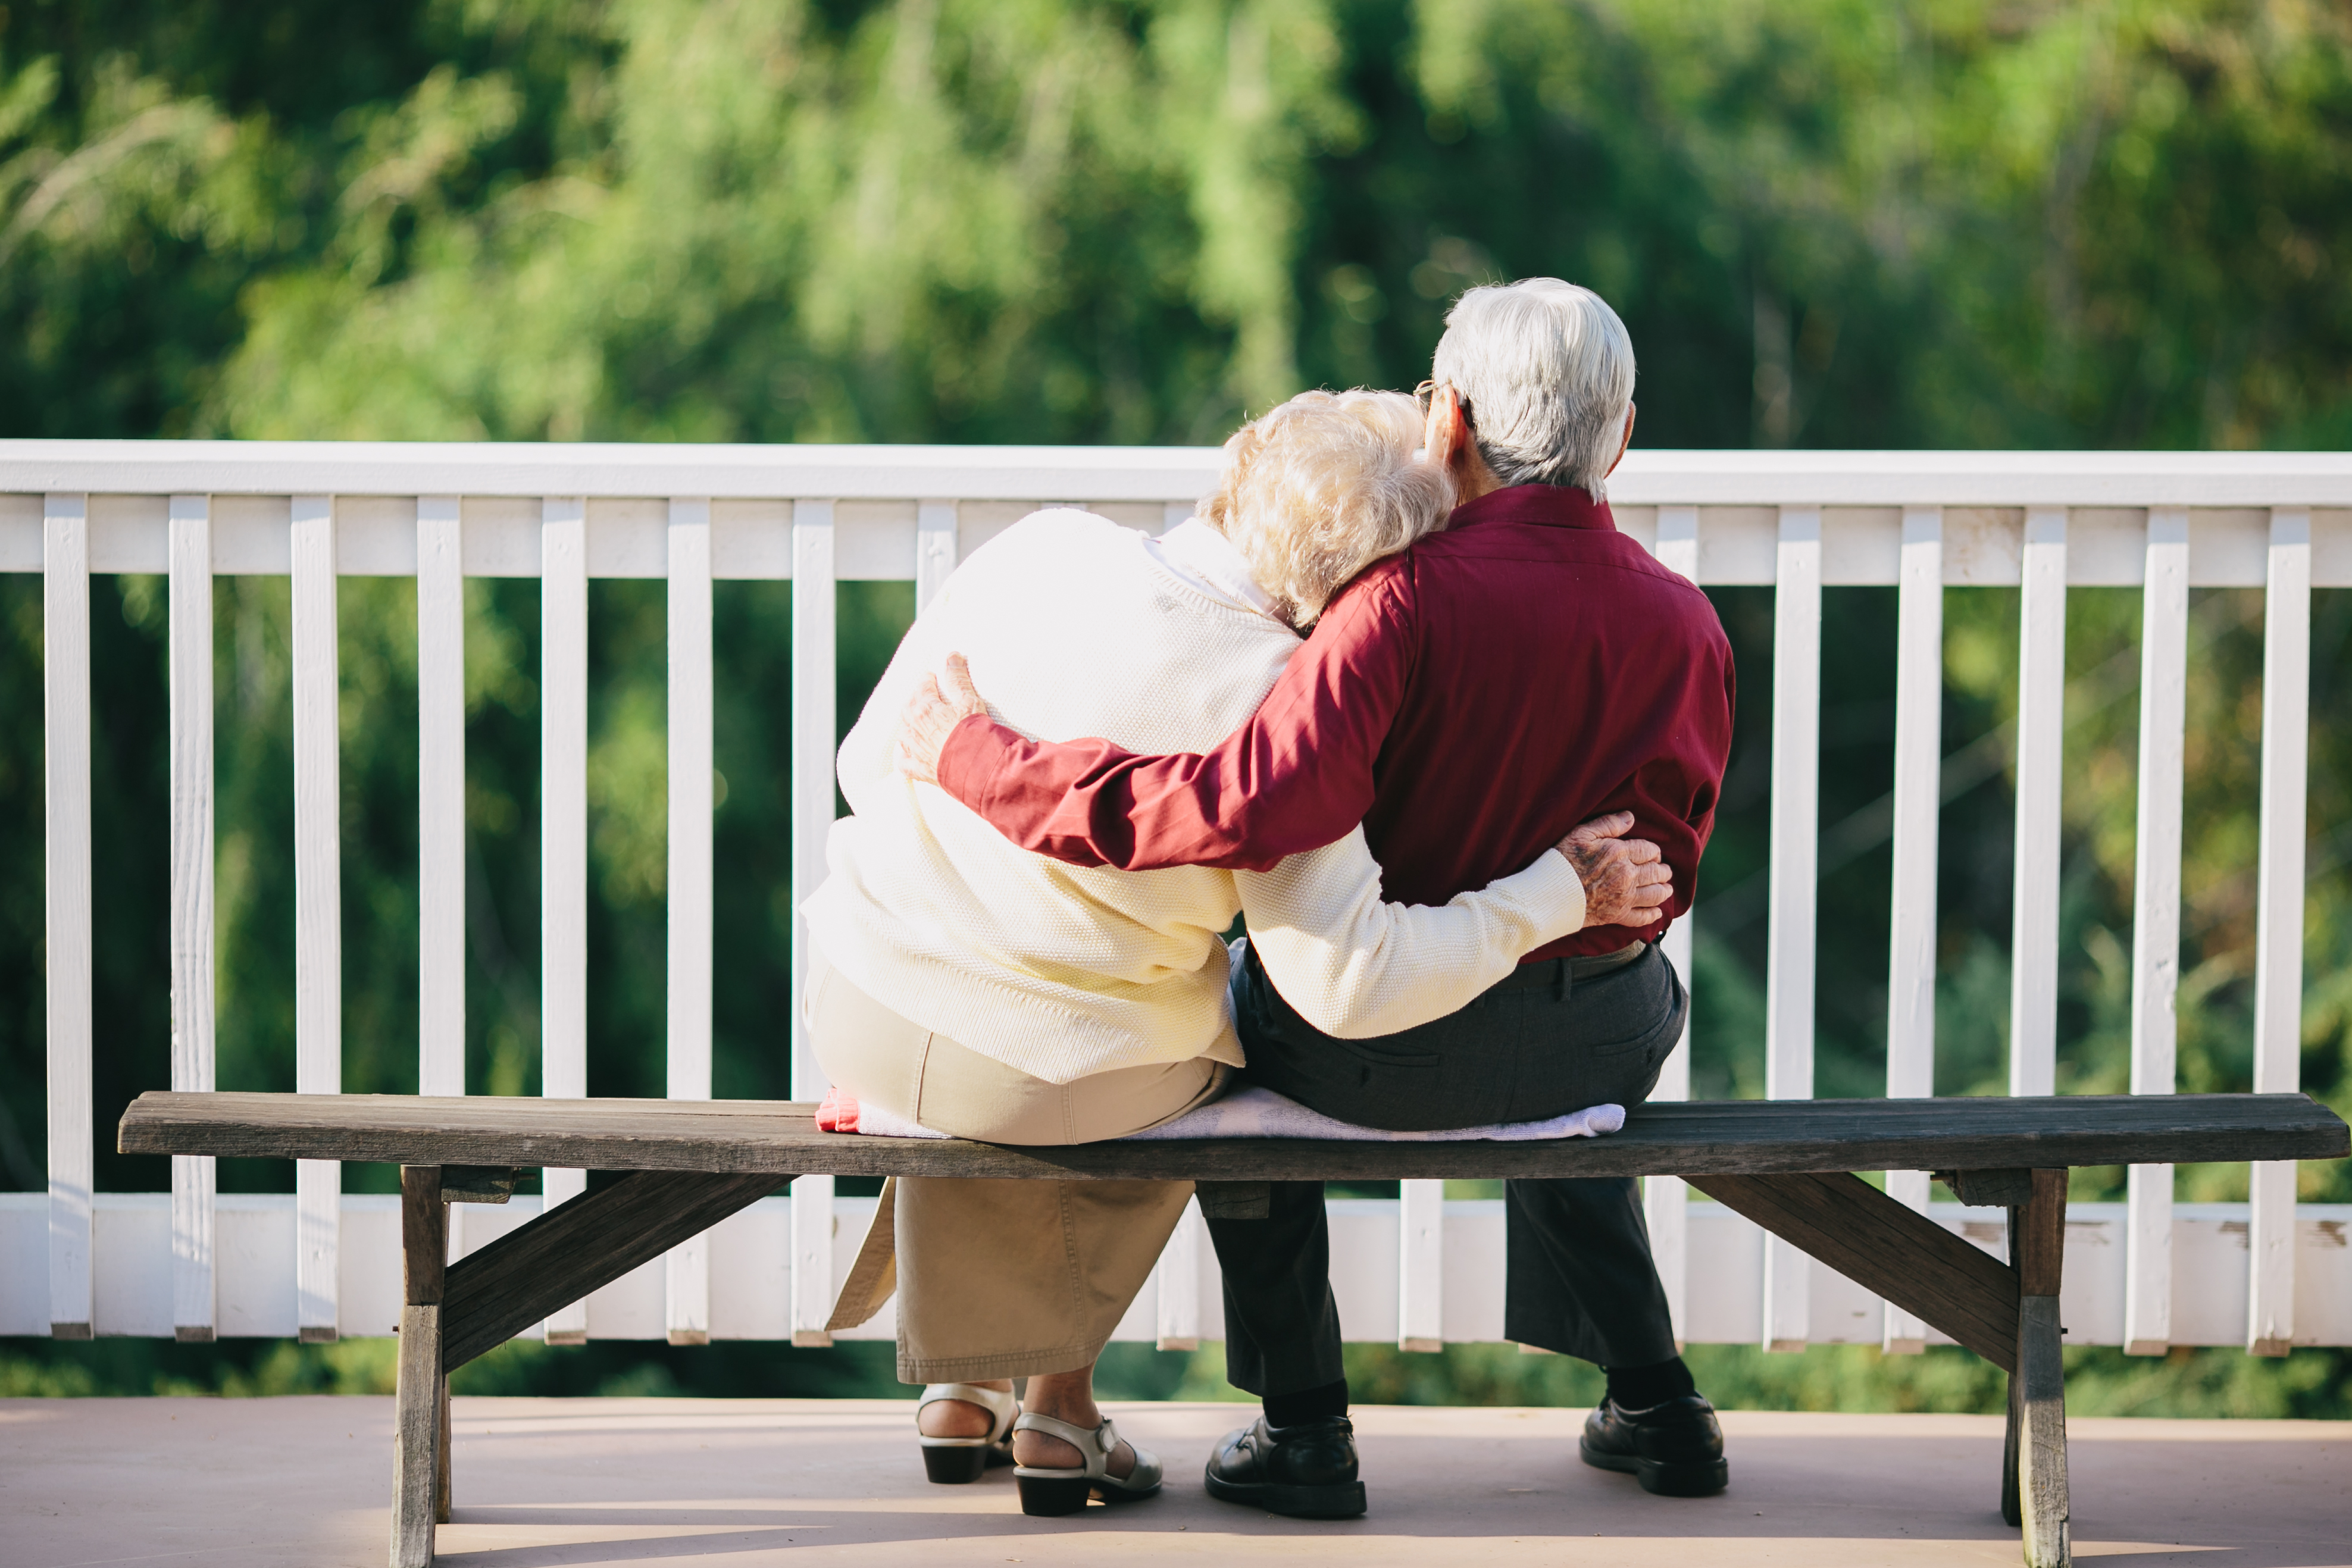 An elderly couple hugging while sitting on a bench outside | Source: Shutterstock